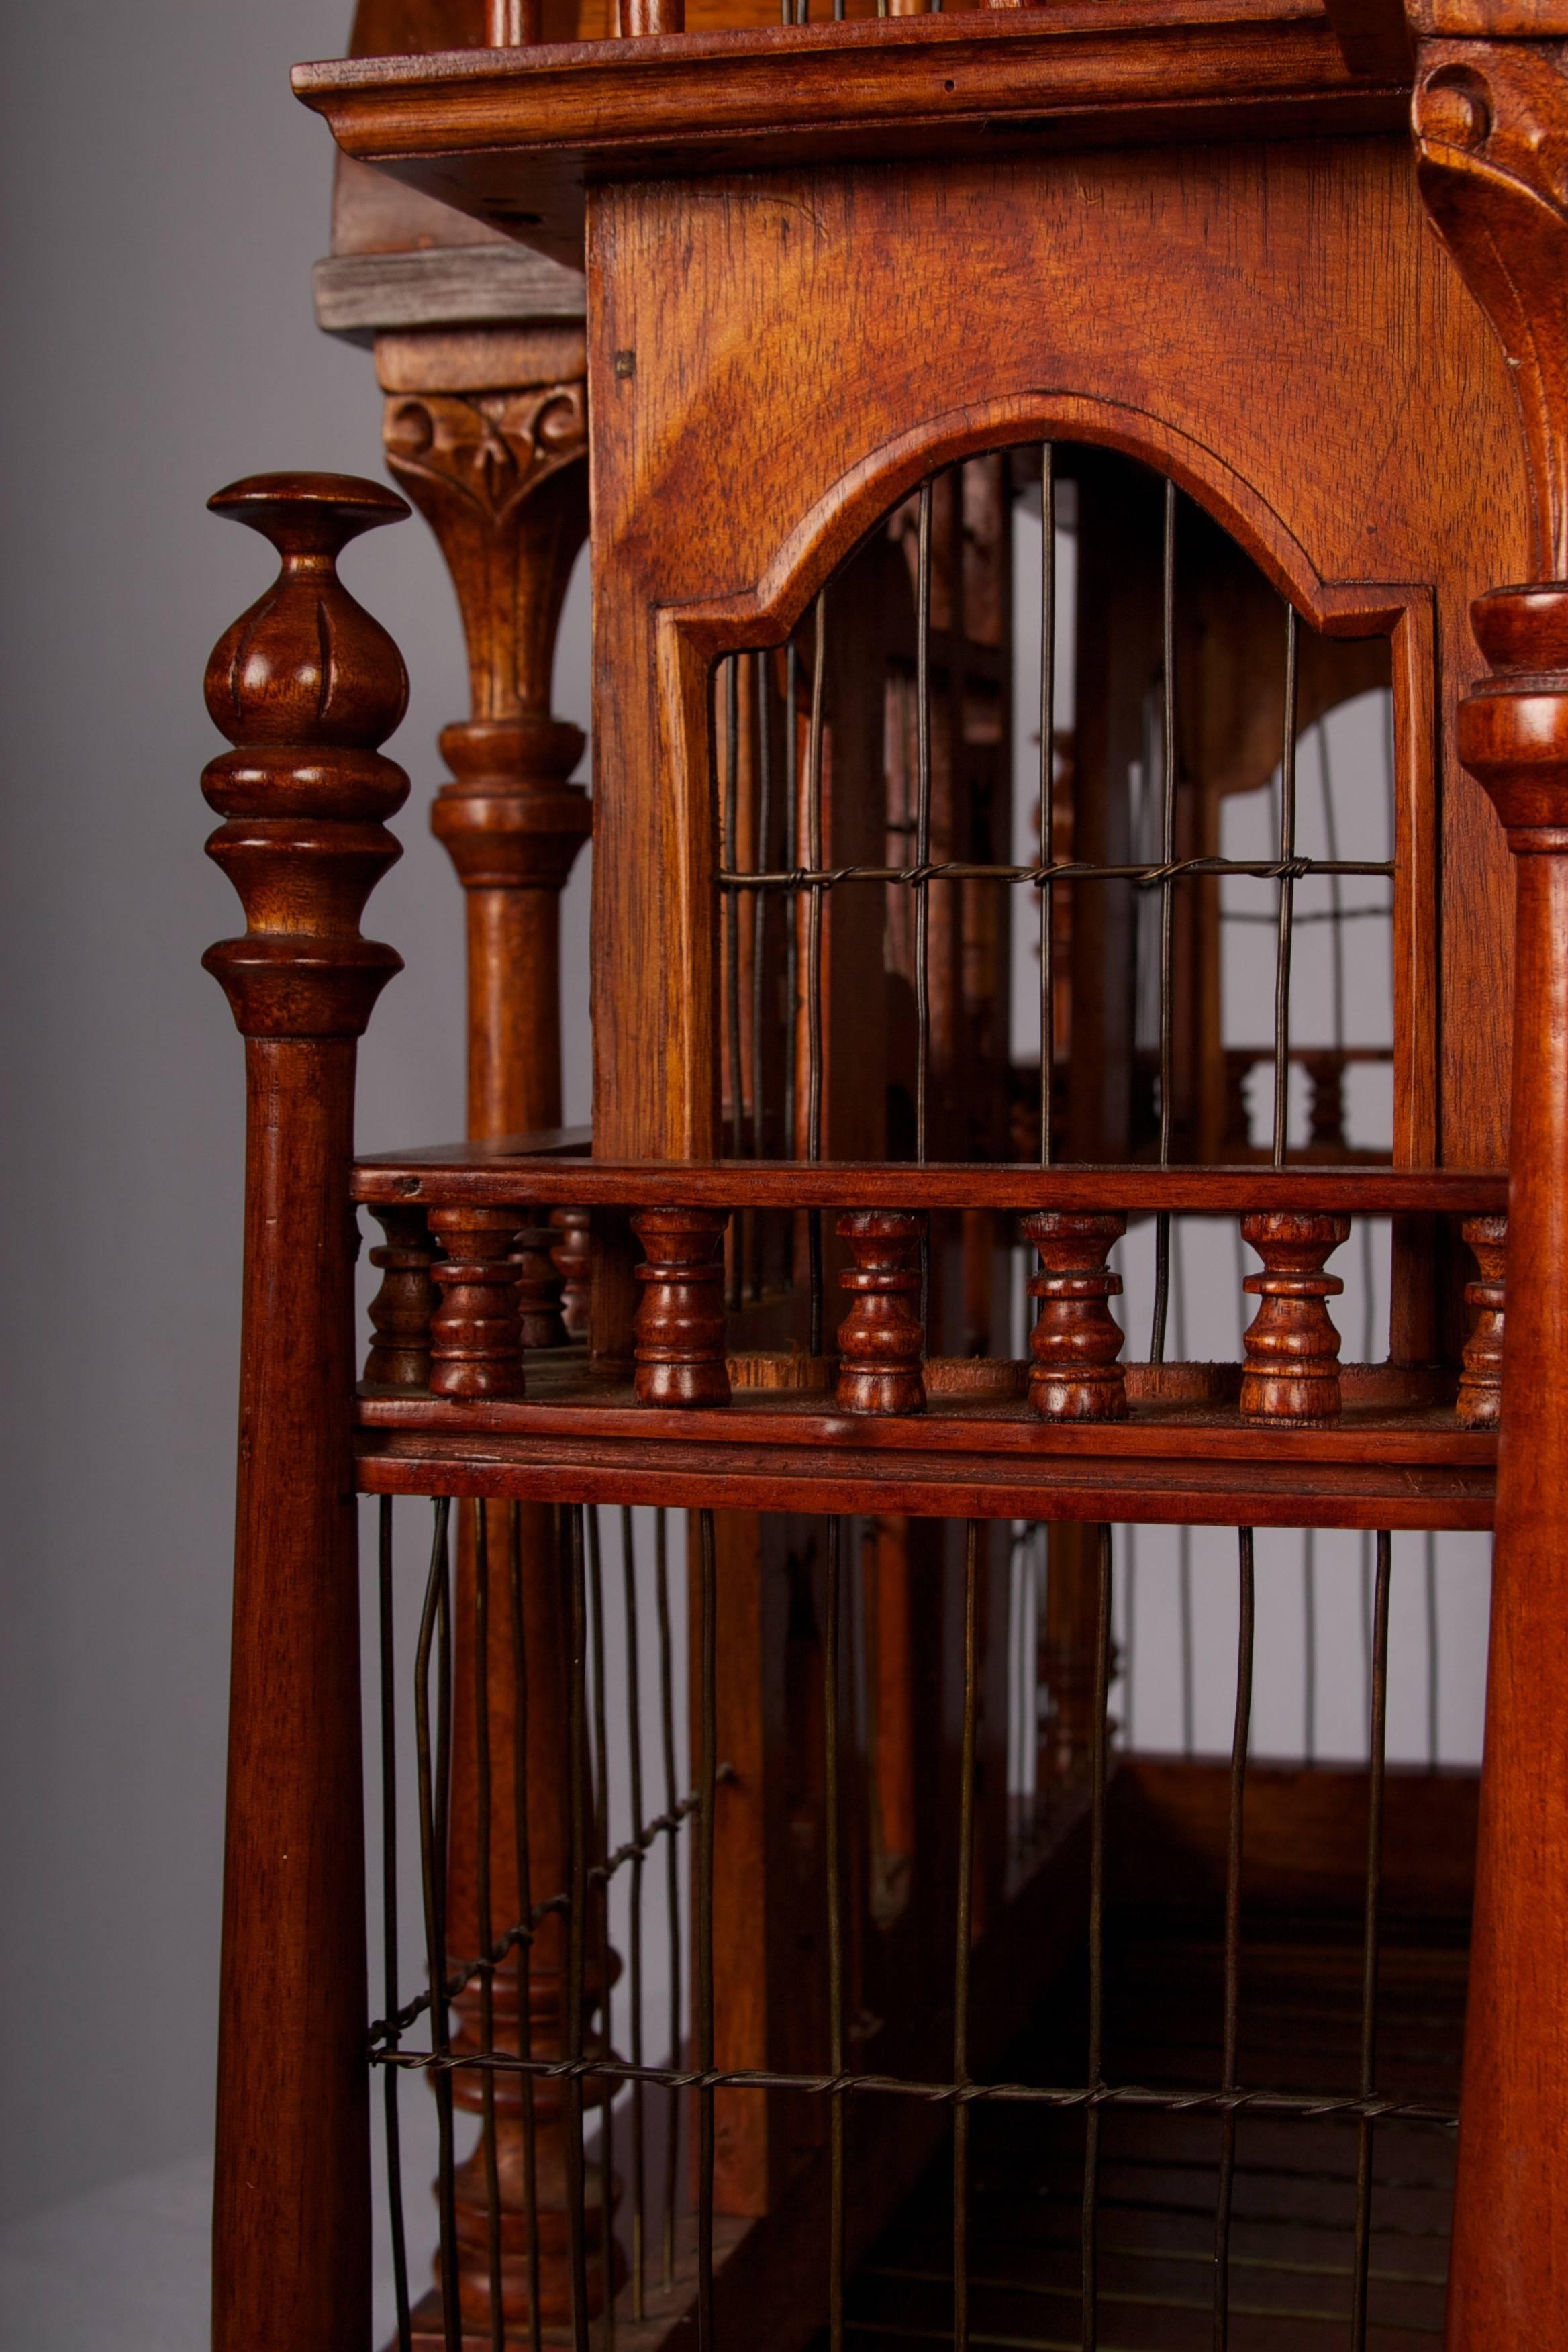 Baroque Revival Victorian Style Architectural Mahogany Birdcage of Large-Scale